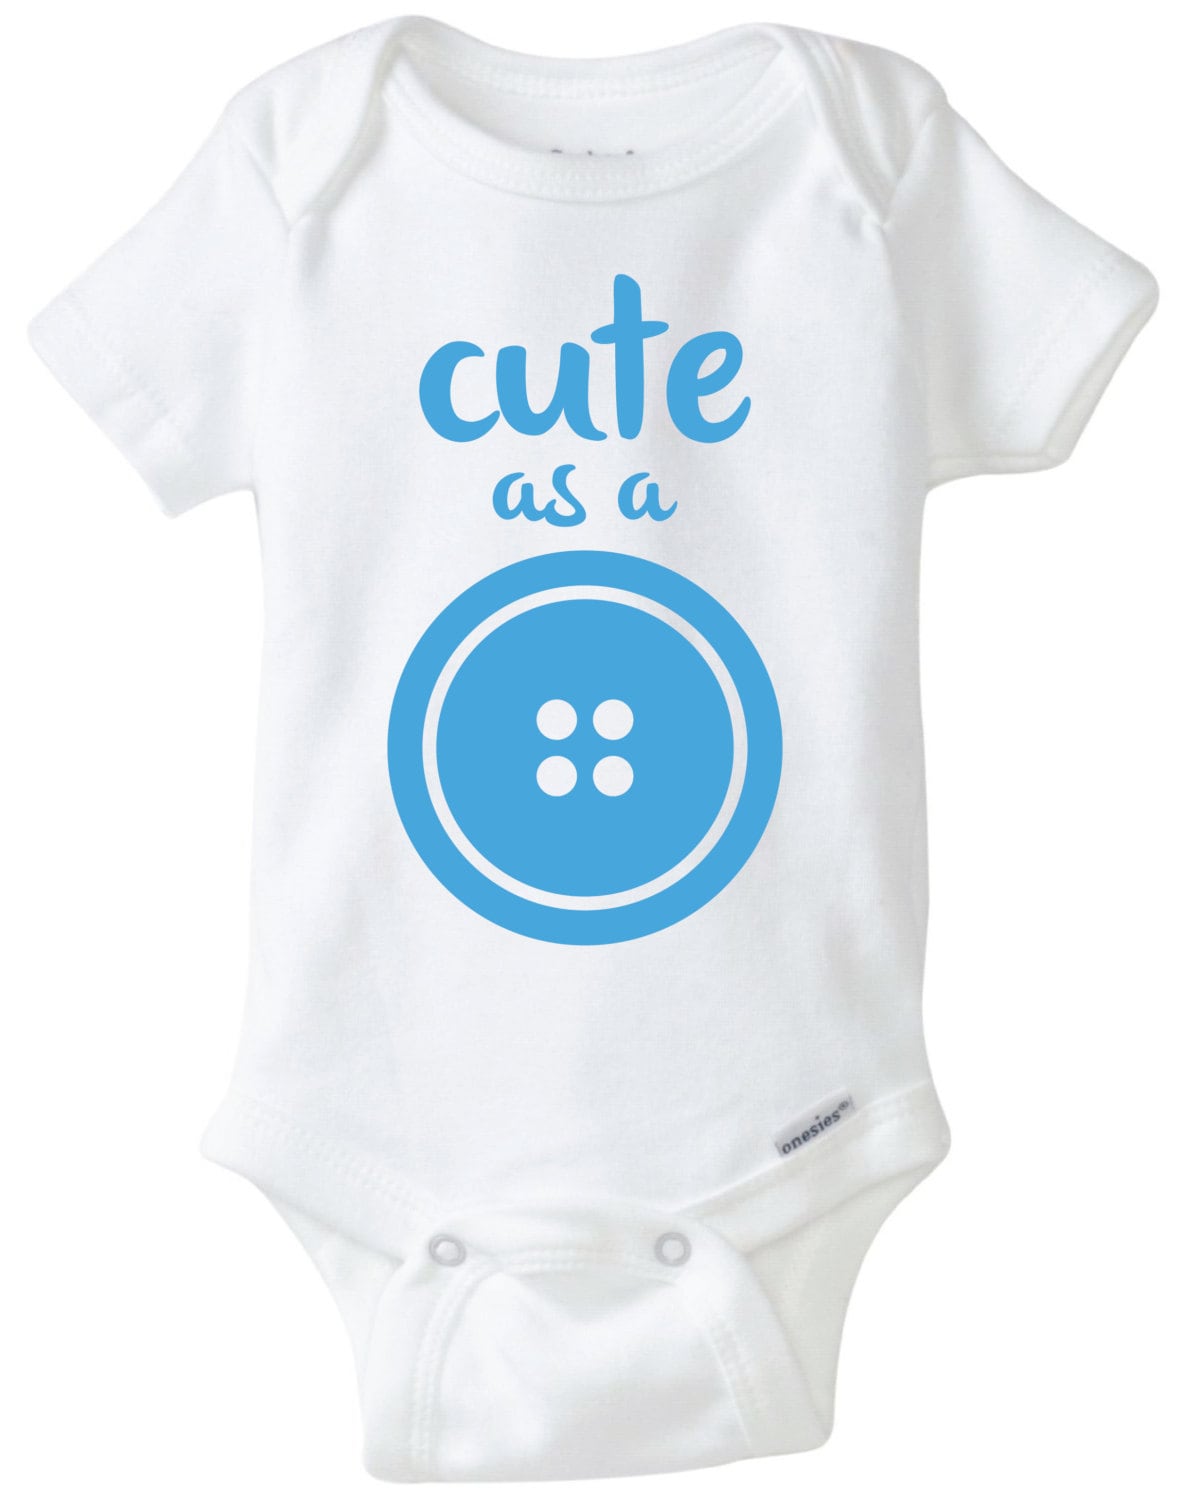 Cute as a Button Baby Onesie Design, SVG, DXF, EPS Vector ...